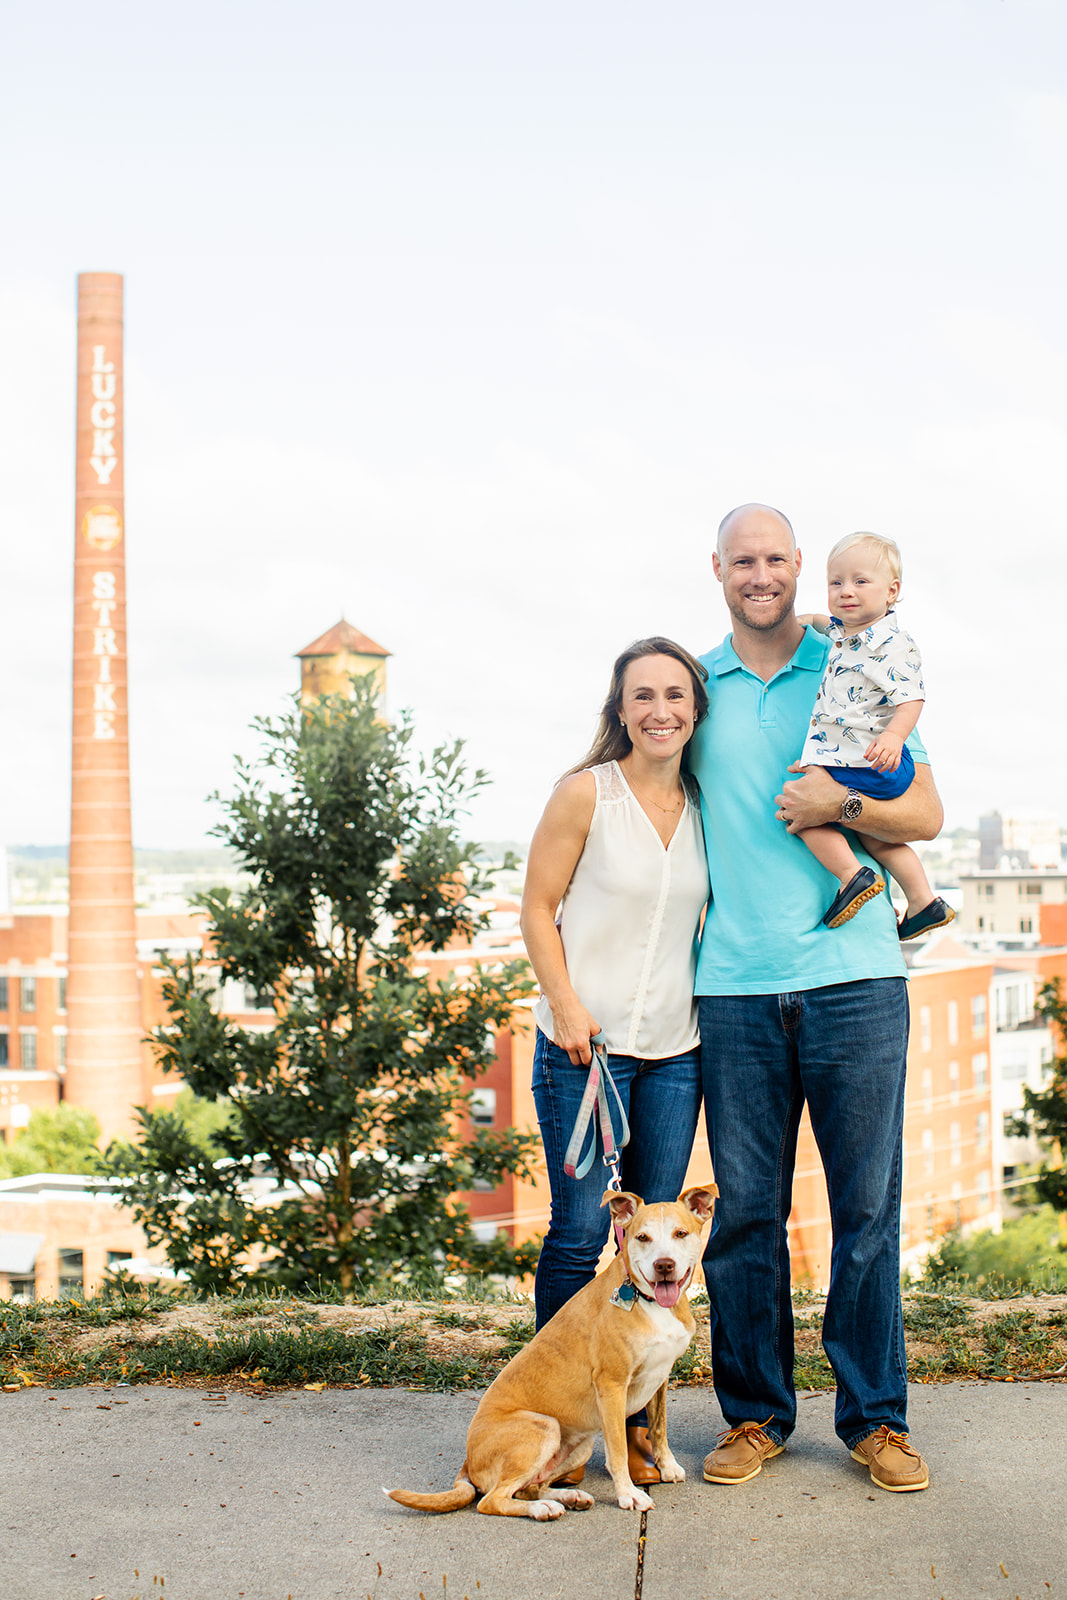 Libby Hill Park One Year Old Mini Family Photo Shoot - Image Property of www.j-dphoto.com